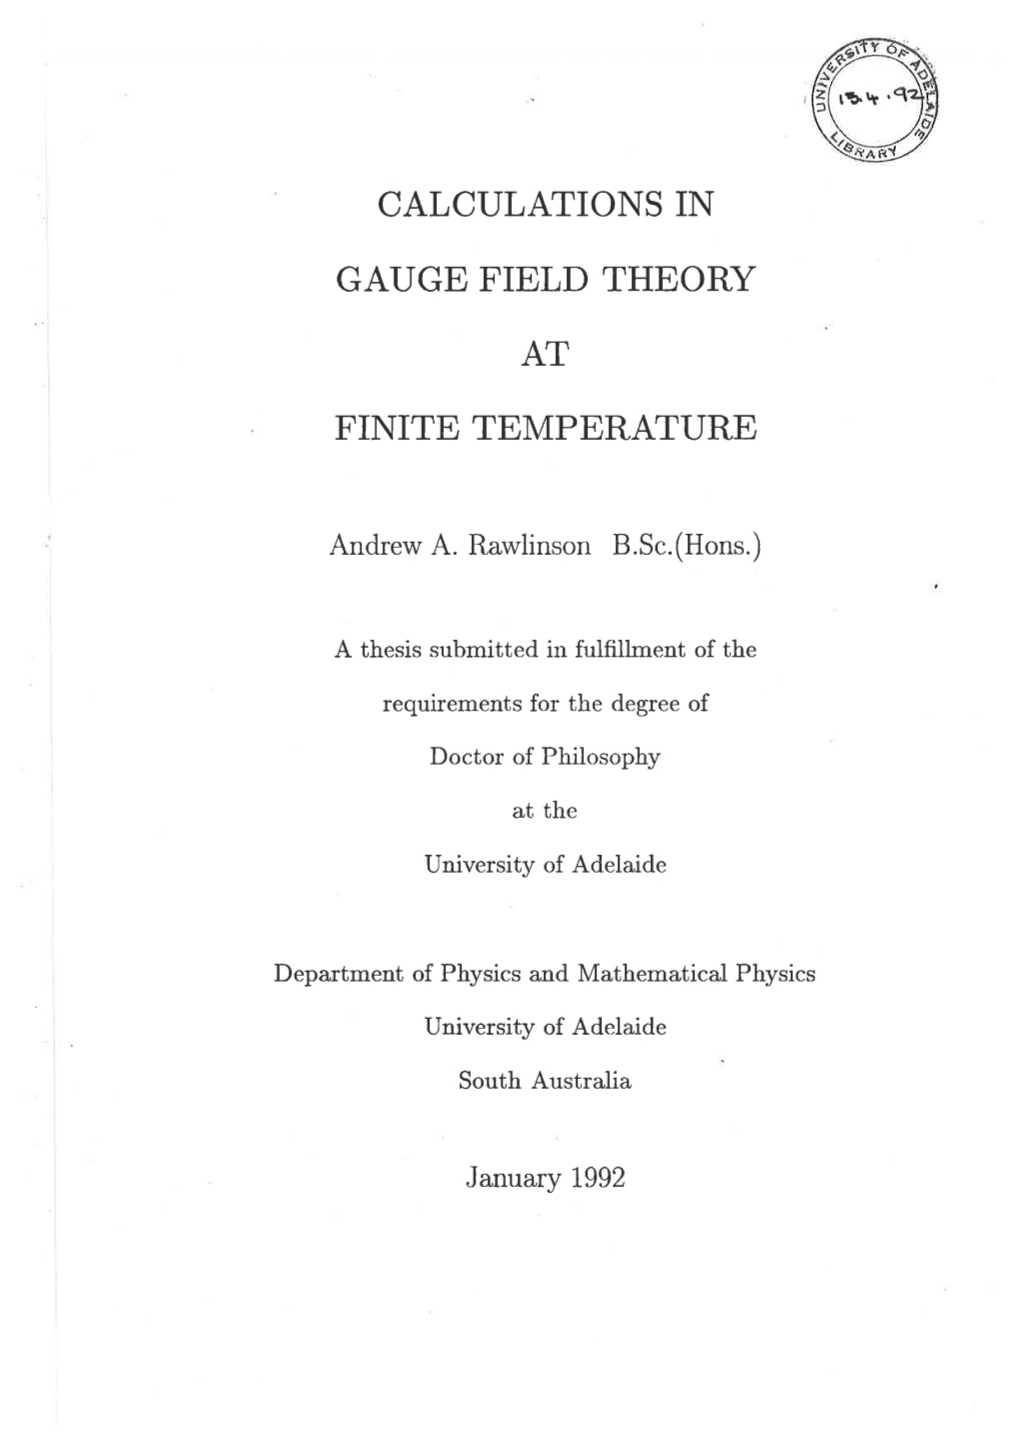 Calculations in Gauge Field Theory at Finite Temperature